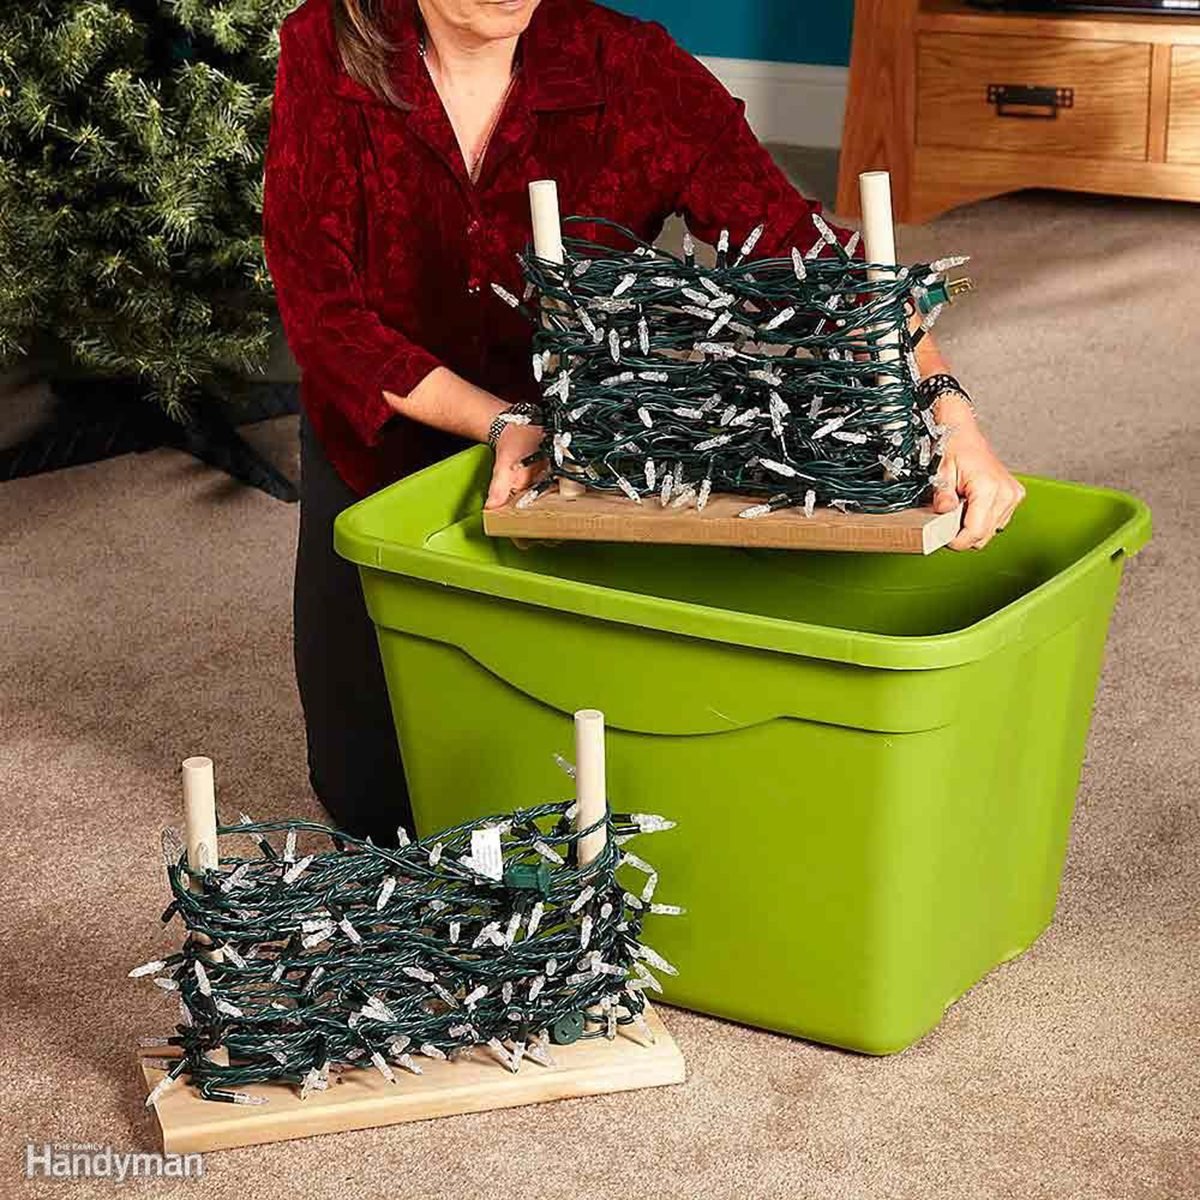 Storing Christmas lights wrapped around wooden pegs and being put into a lime green plastic tub